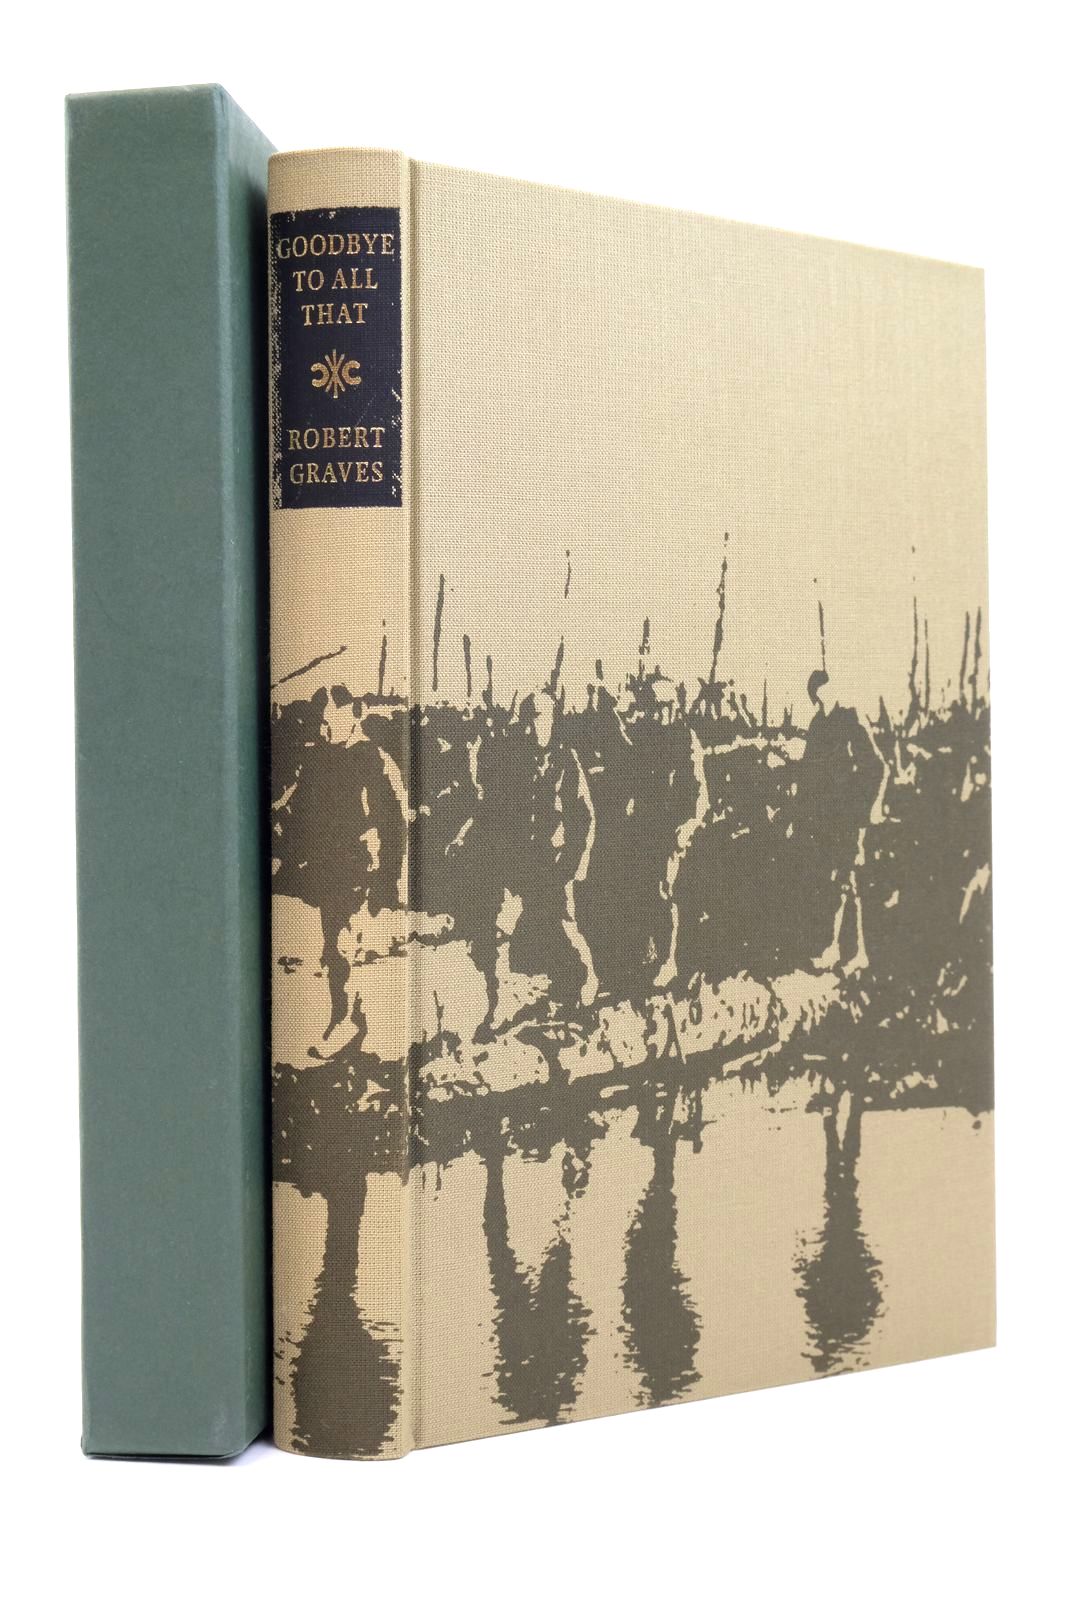 Photo of GOODBYE TO ALL THAT written by Graves, Robert Trevelyan, Raleigh published by Folio Society (STOCK CODE: 2138587)  for sale by Stella & Rose's Books